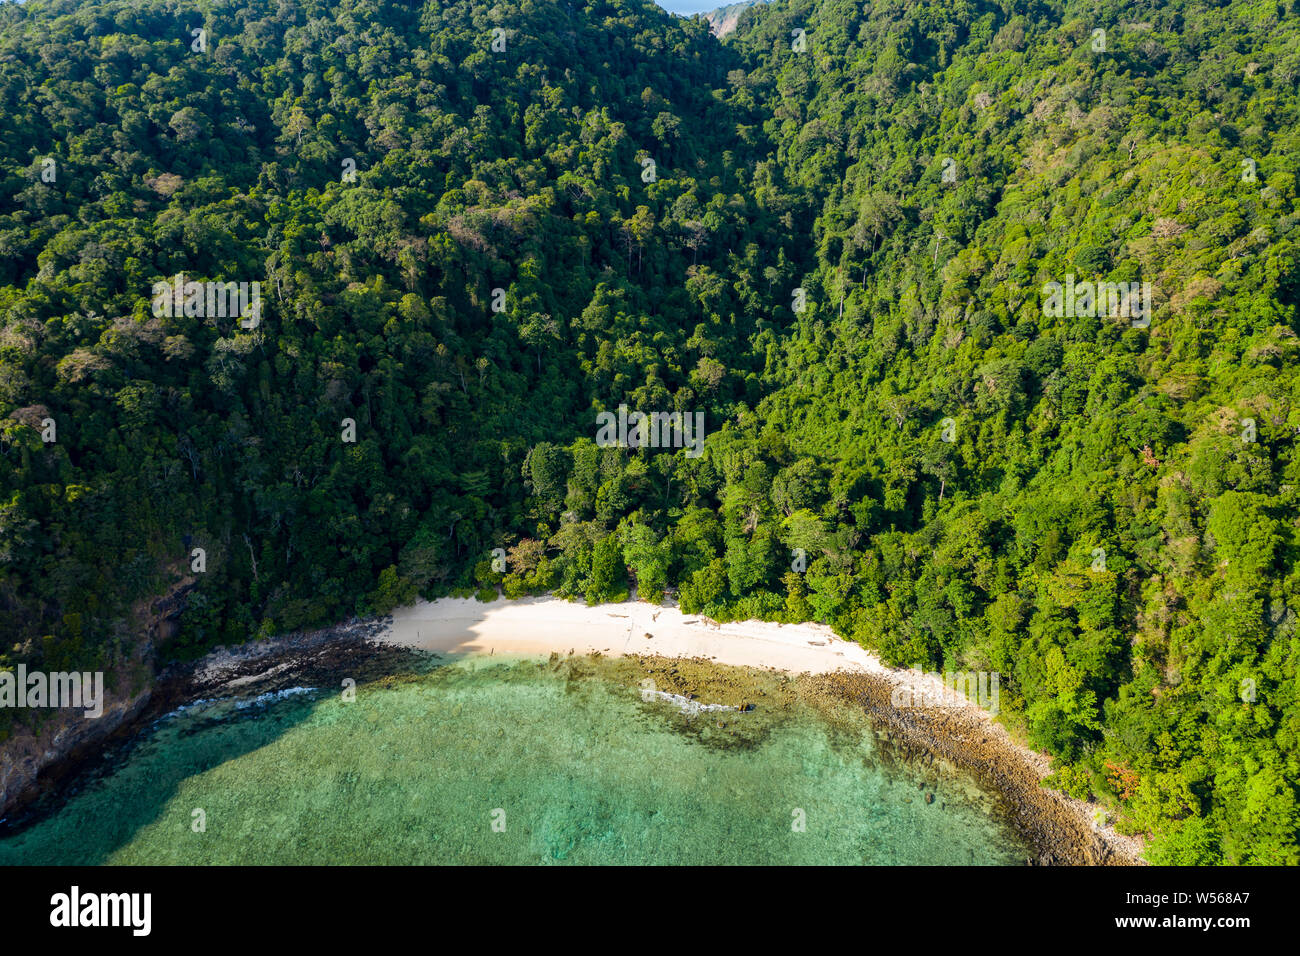 Aerial drone view of a small beach on a lush, green tropical island Stock Photo